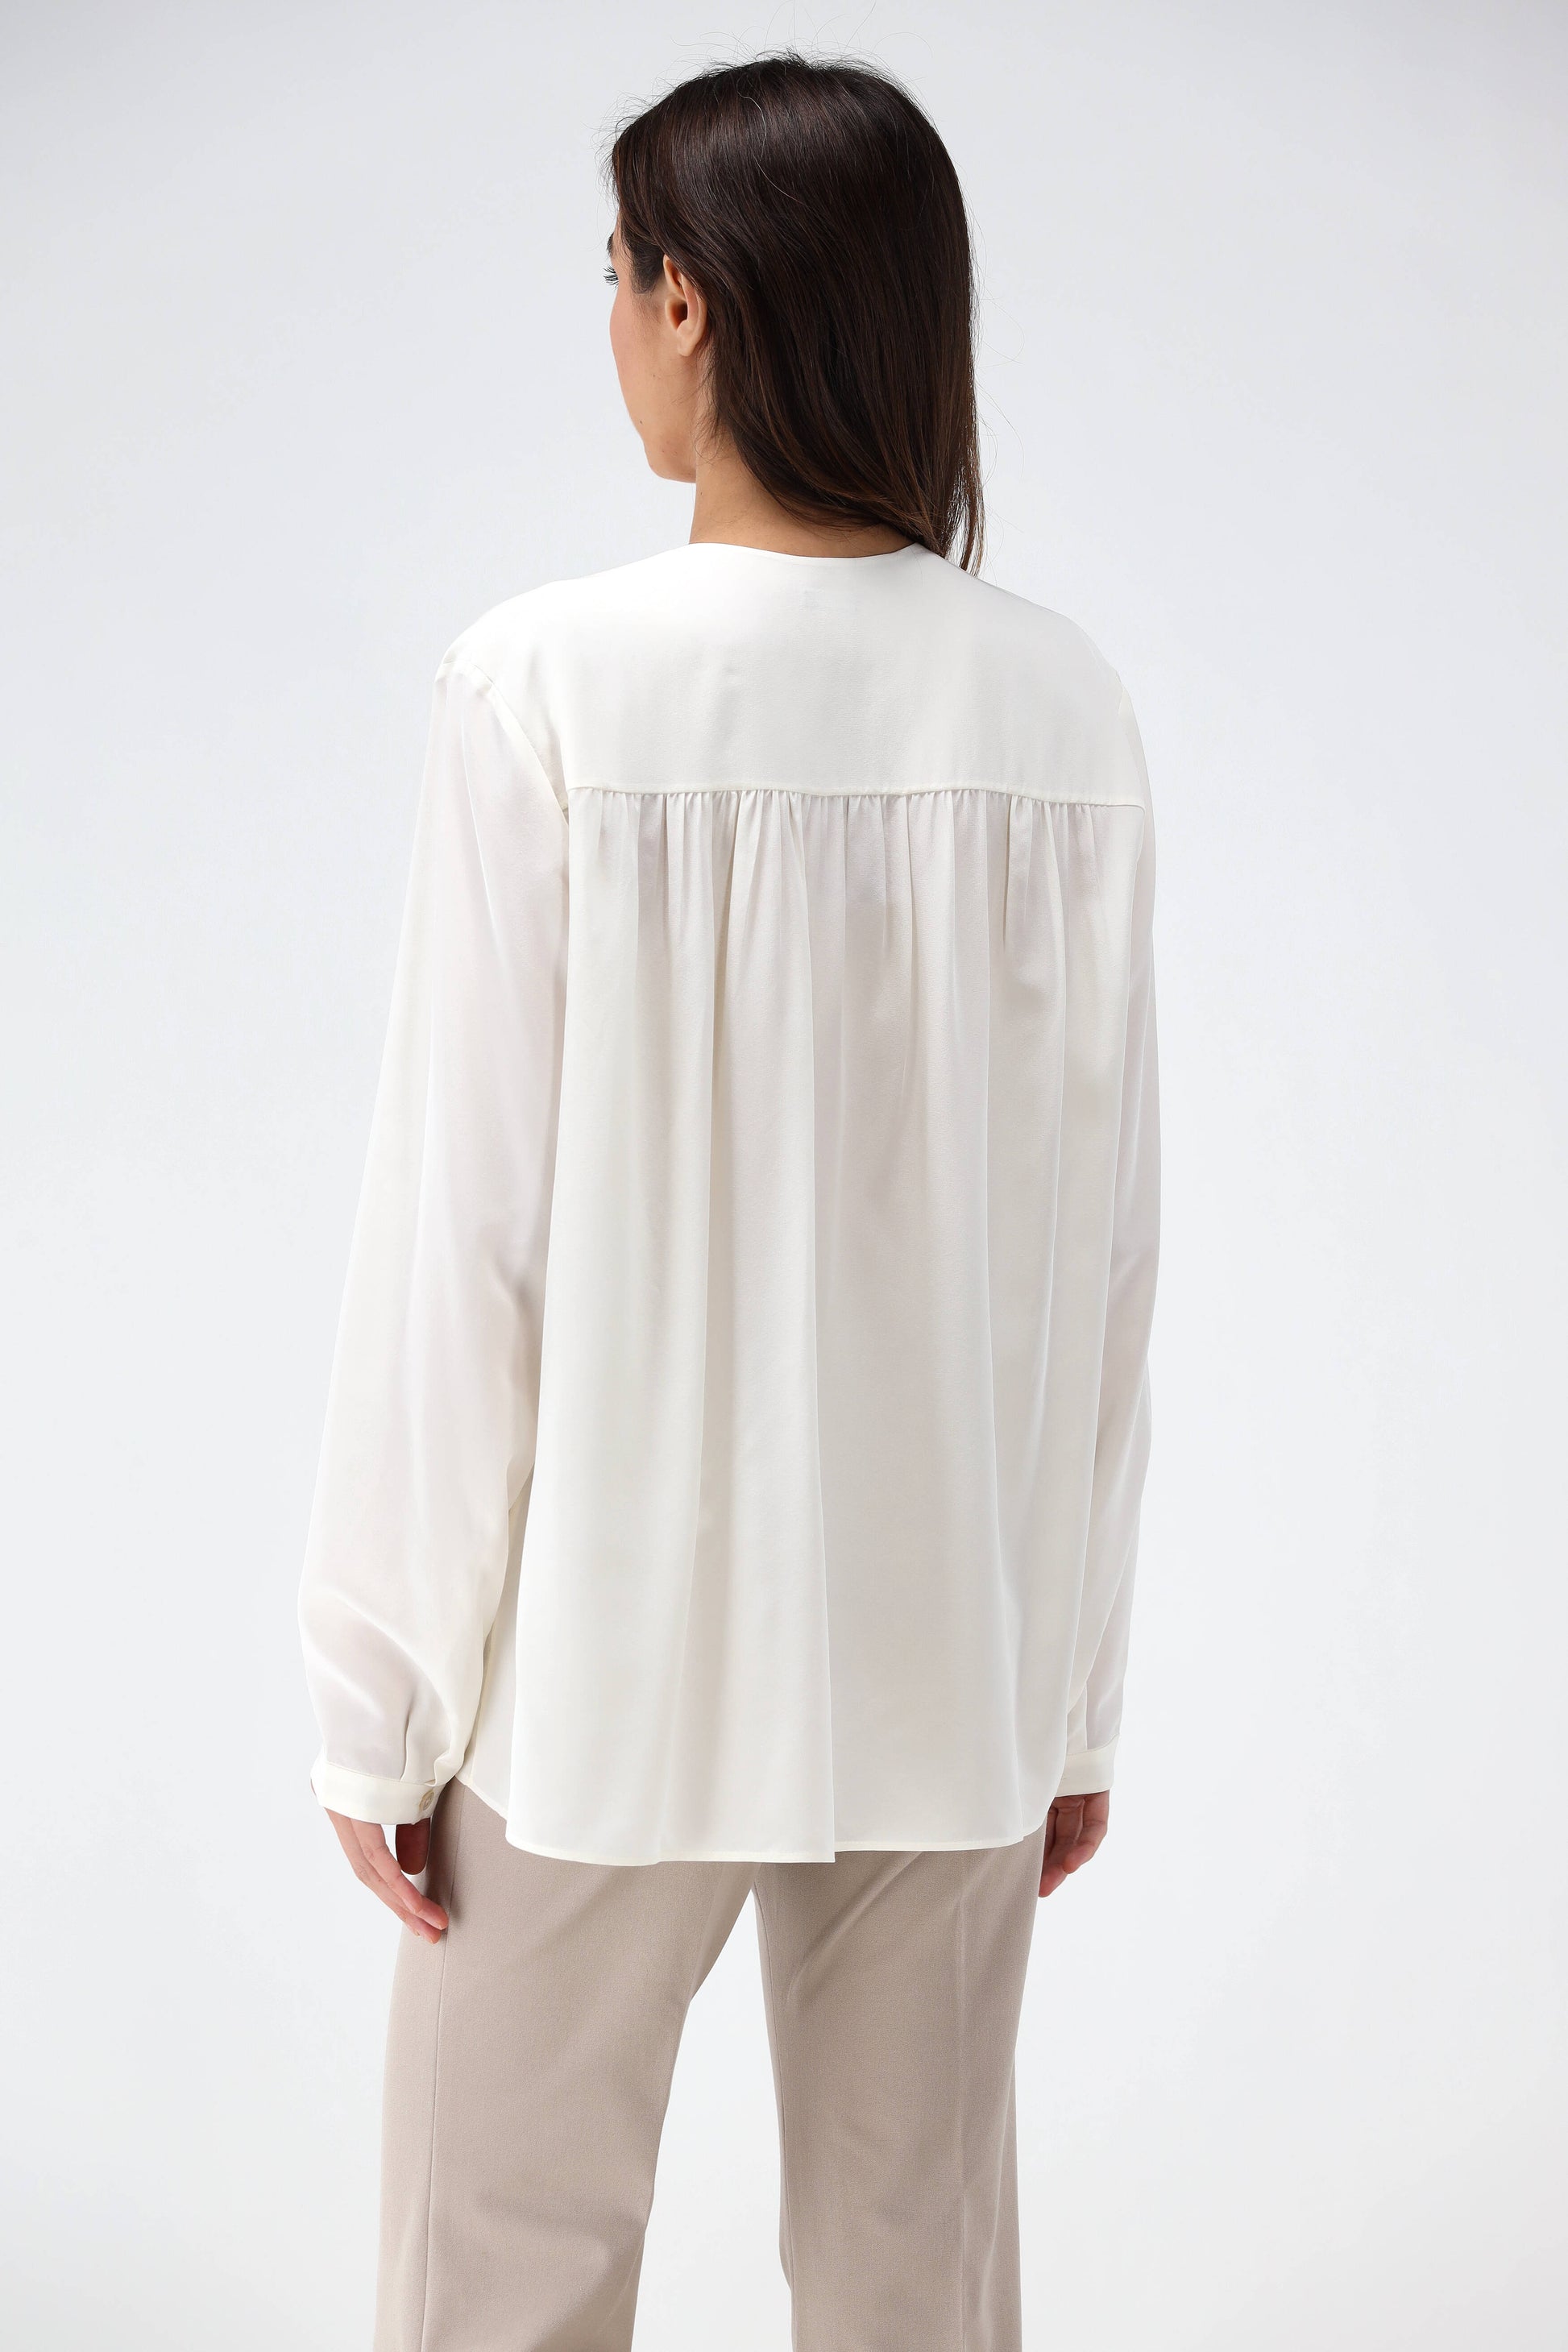 Bluse Newell in IvoryJoseph - Anita Hass